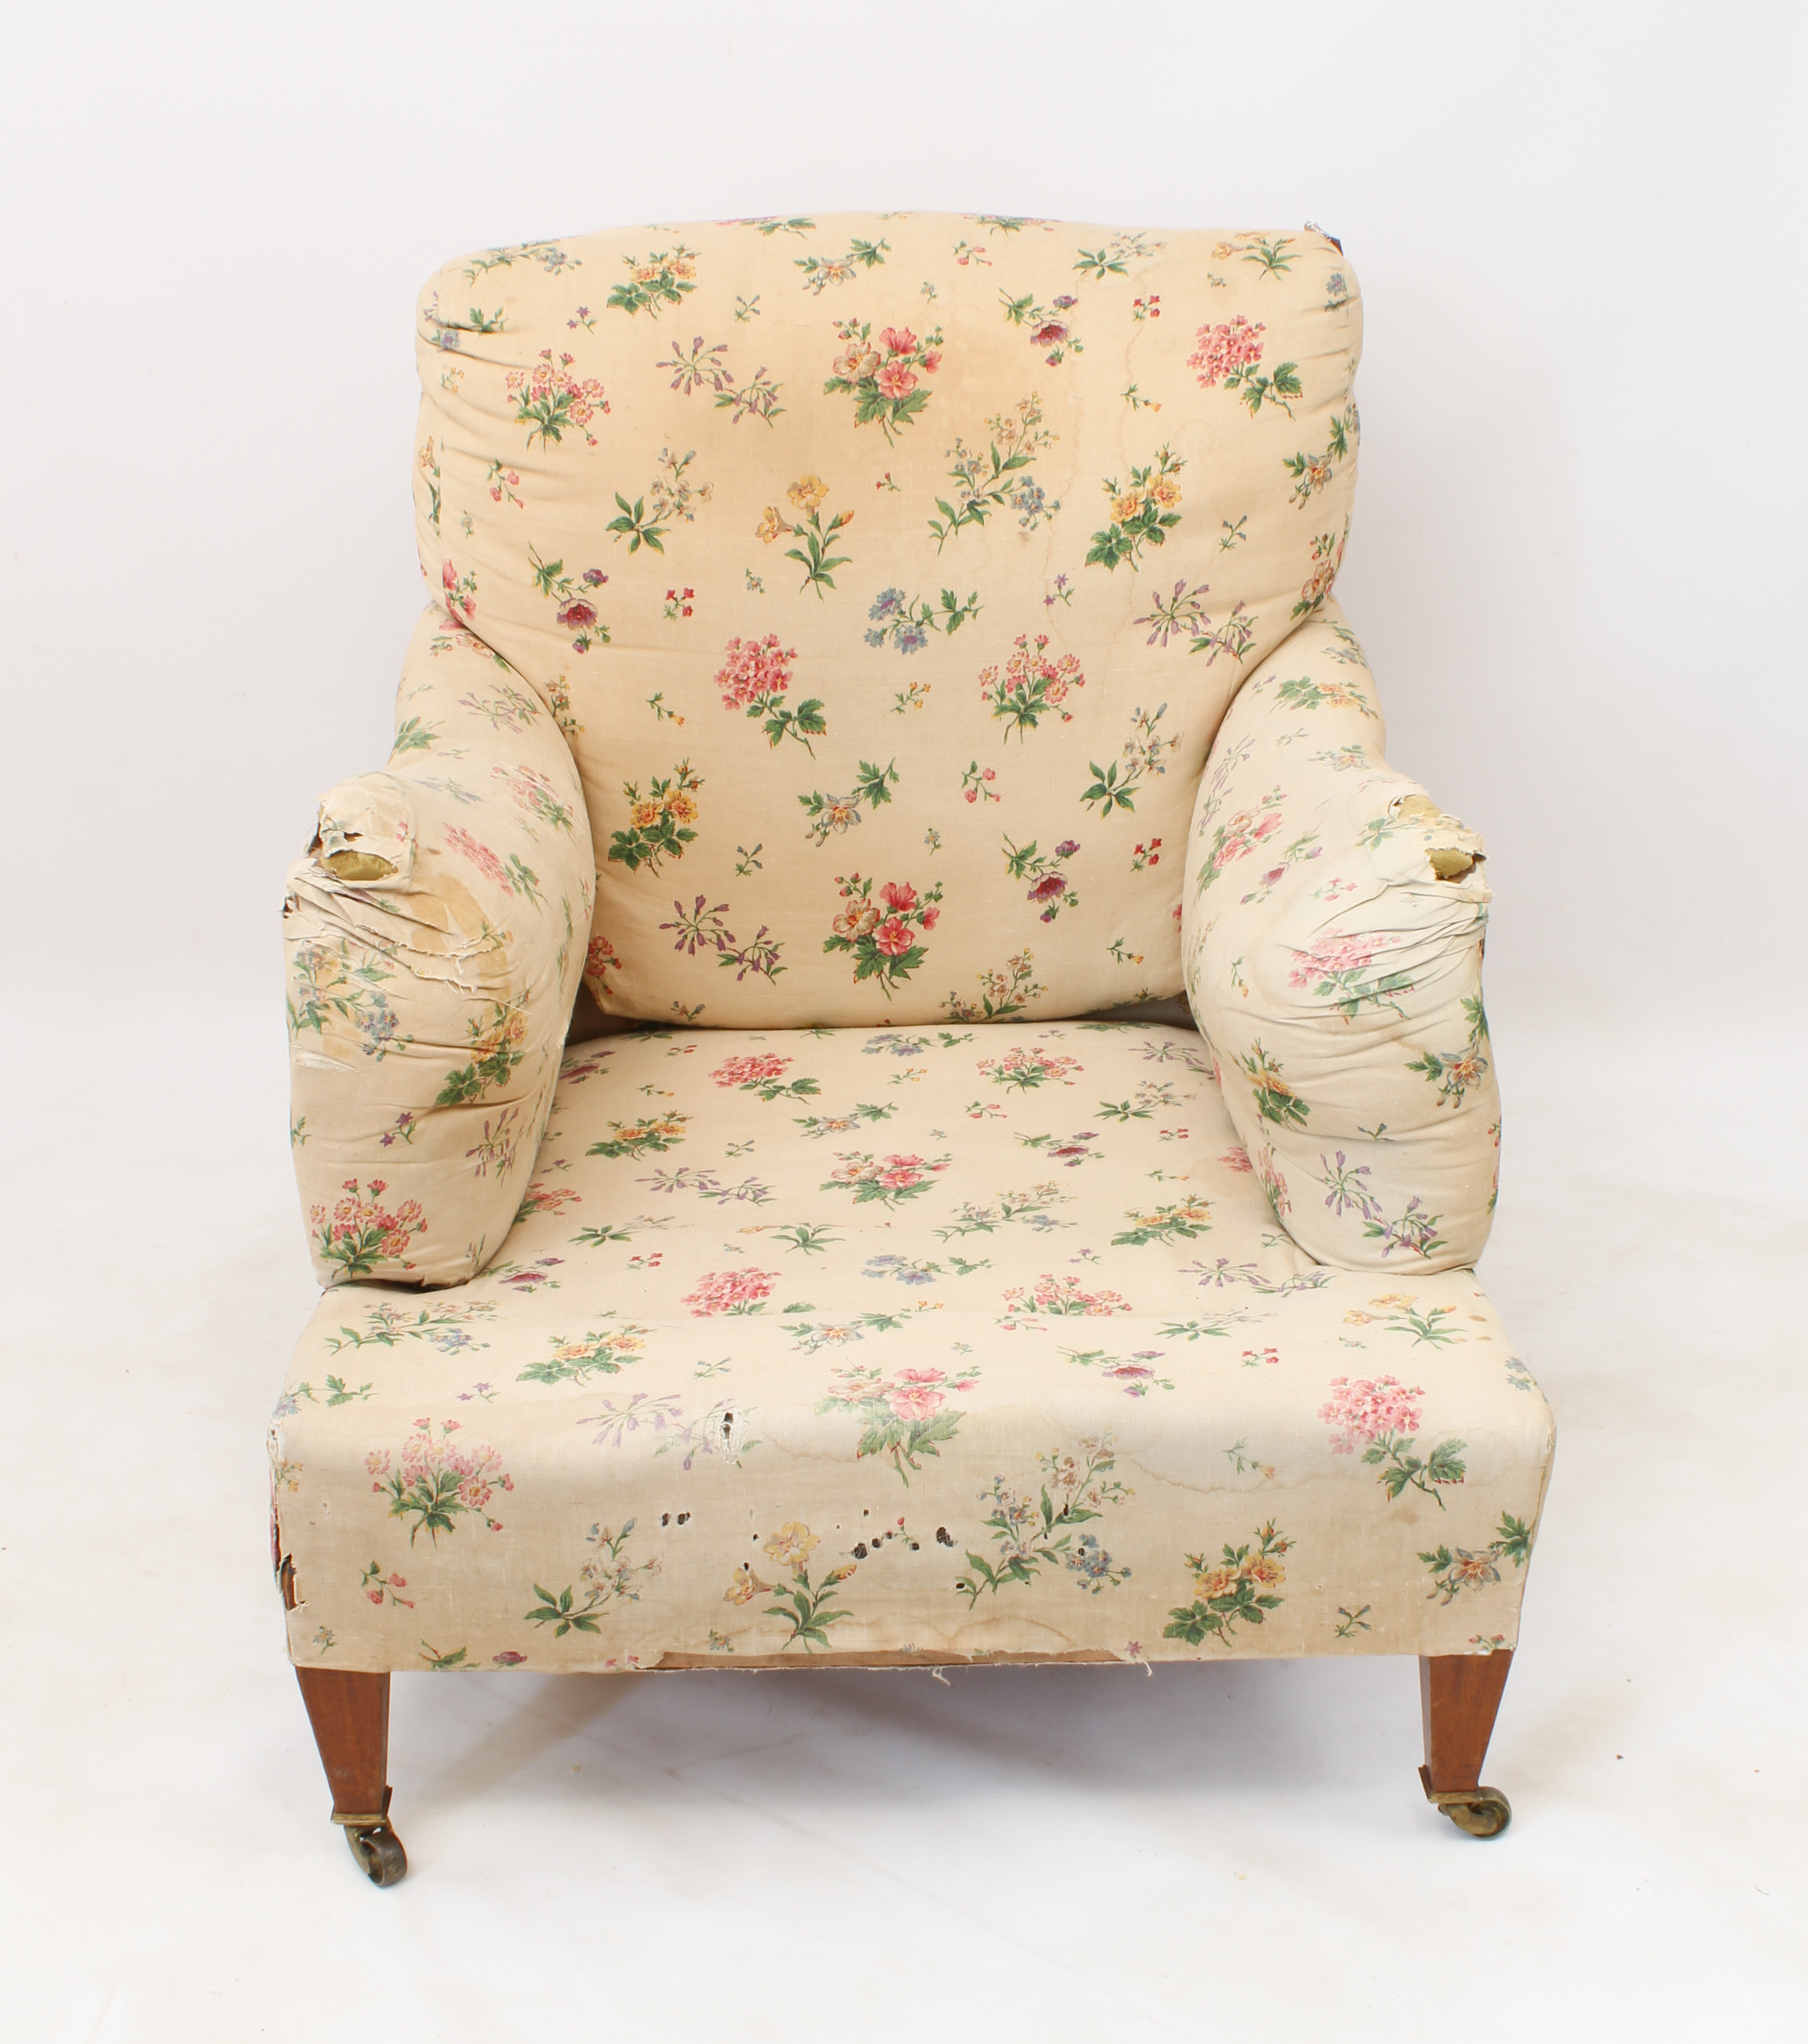 An early 20th century armchair by Howard & Sons - upholstered in early 20th century printed floral - Image 3 of 16